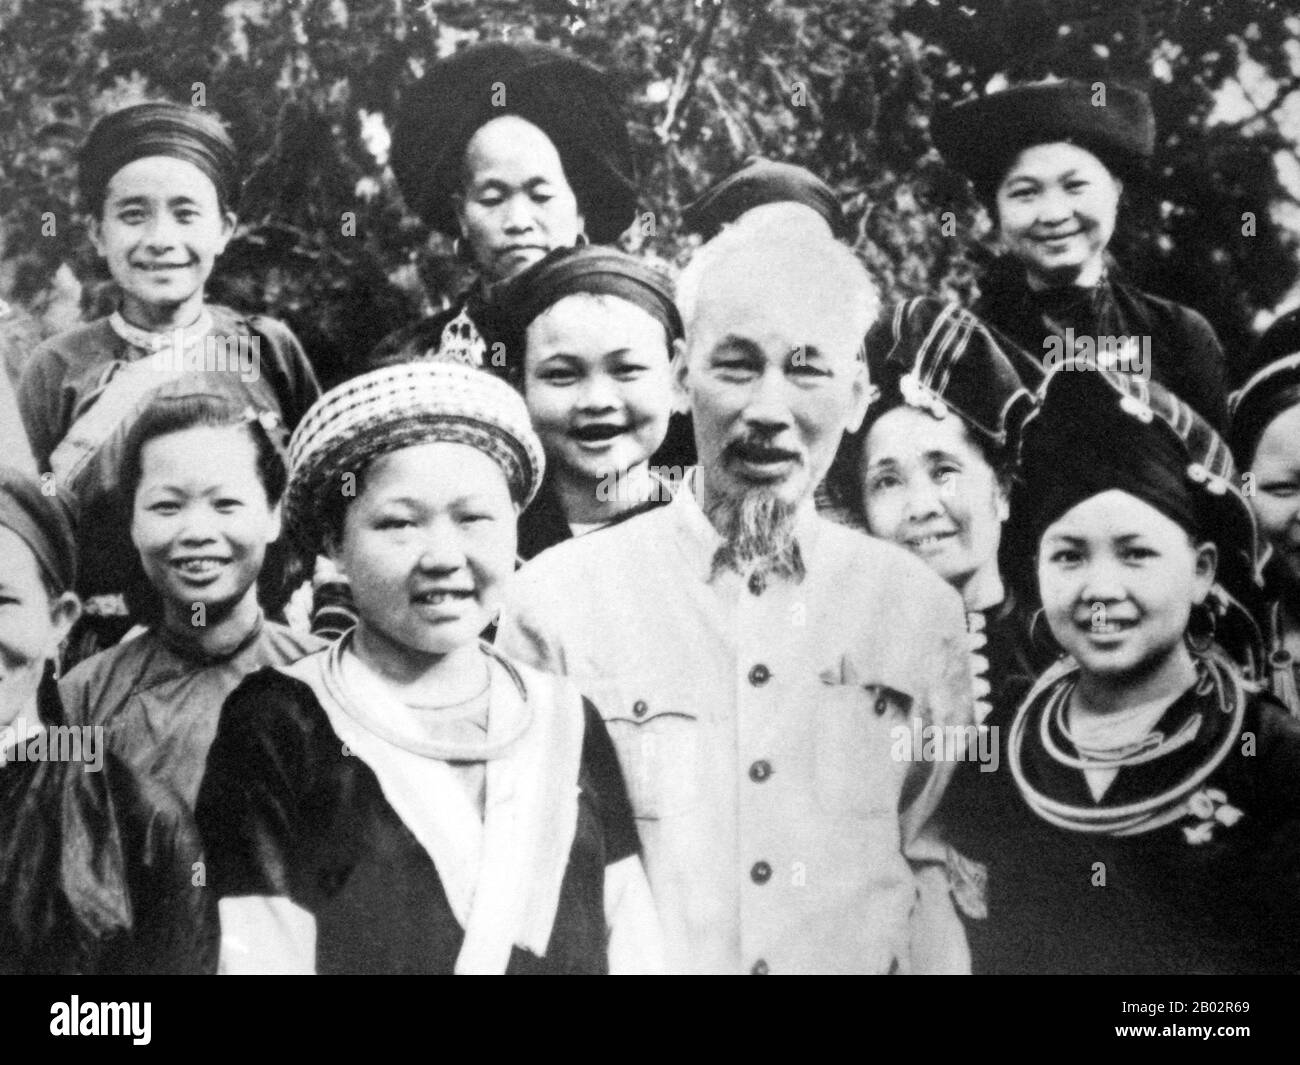 Hồ Chí Minh, born Nguyễn Sinh Cung and also known as Nguyễn Ái Quốc (19 May 1890 – 3 September 1969) was a Vietnamese Communist revolutionary leader who was prime minister (1946–1955) and president (1945–1969) of the Democratic Republic of Vietnam (North Vietnam). He formed the Democratic Republic of Vietnam and led the Viet Cong during the Vietnam War until his death.  Hồ led the Viet Minh independence movement from 1941 onward, establishing the communist-governed Democratic Republic of Vietnam in 1945 and defeating the French Union in 1954 at Dien Bien Phu. He lost political power inside Nor Stock Photo